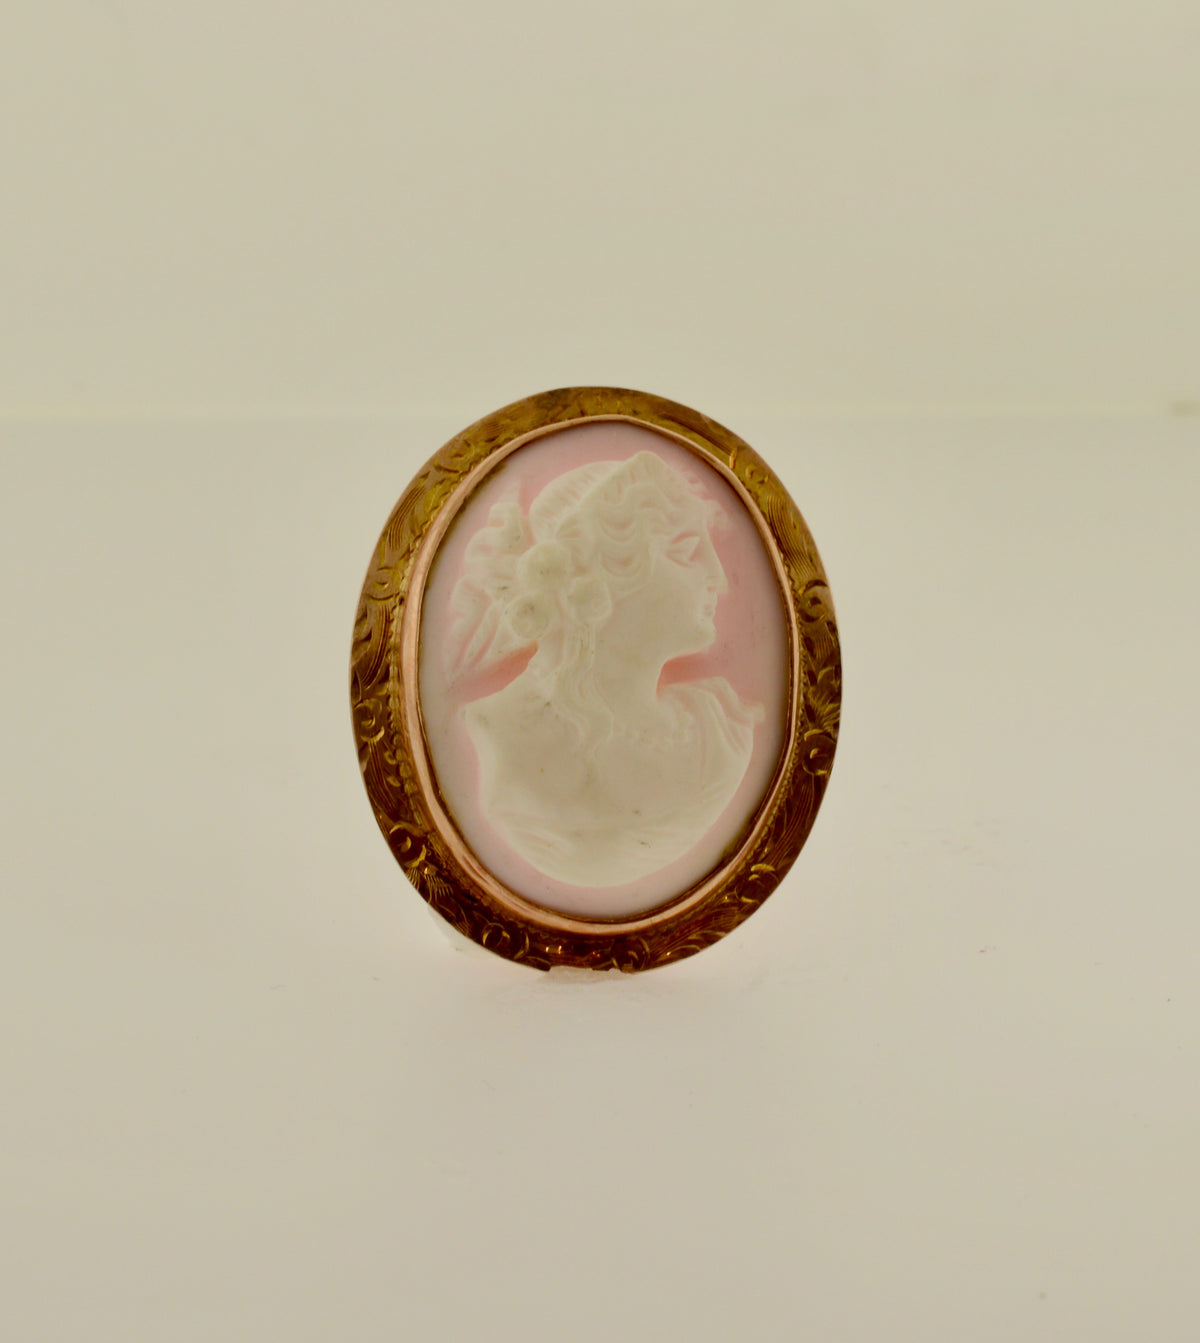 Antique Cameo Gold Brooch/Pendant with Engraved Frame